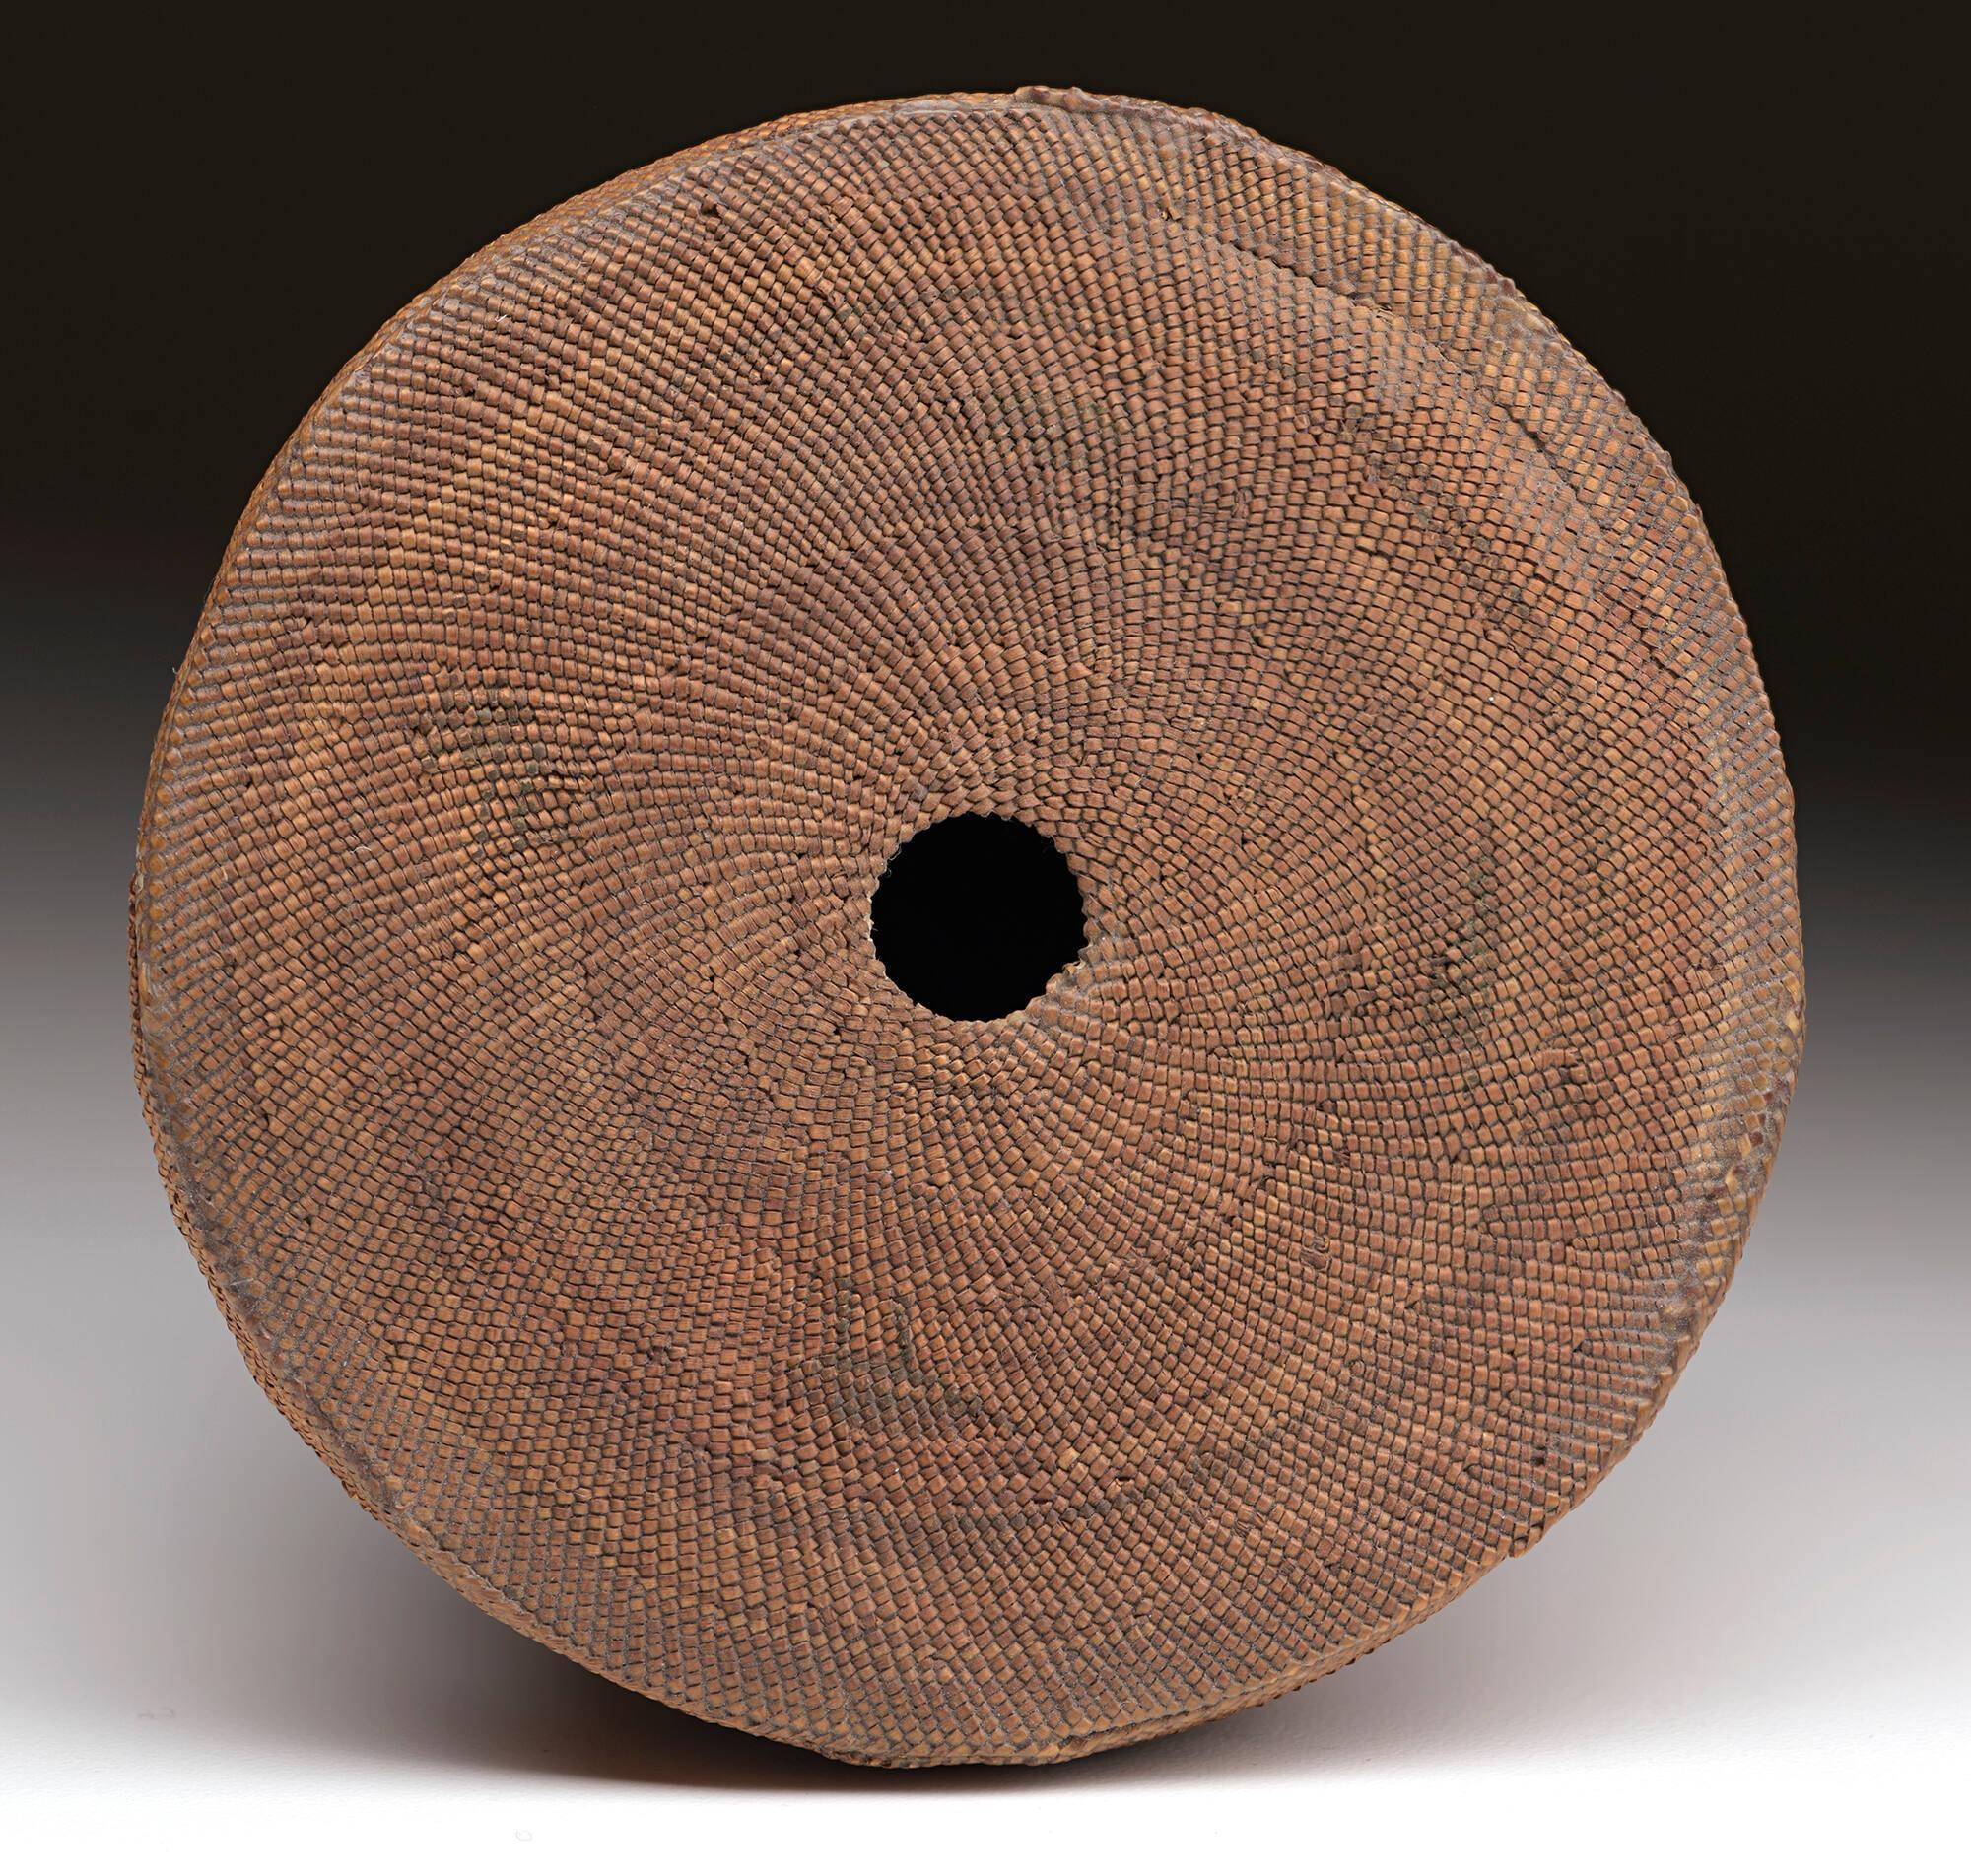 Lid of a small, woven Native American basket, with a hole in the center, made by a Makah weaver.